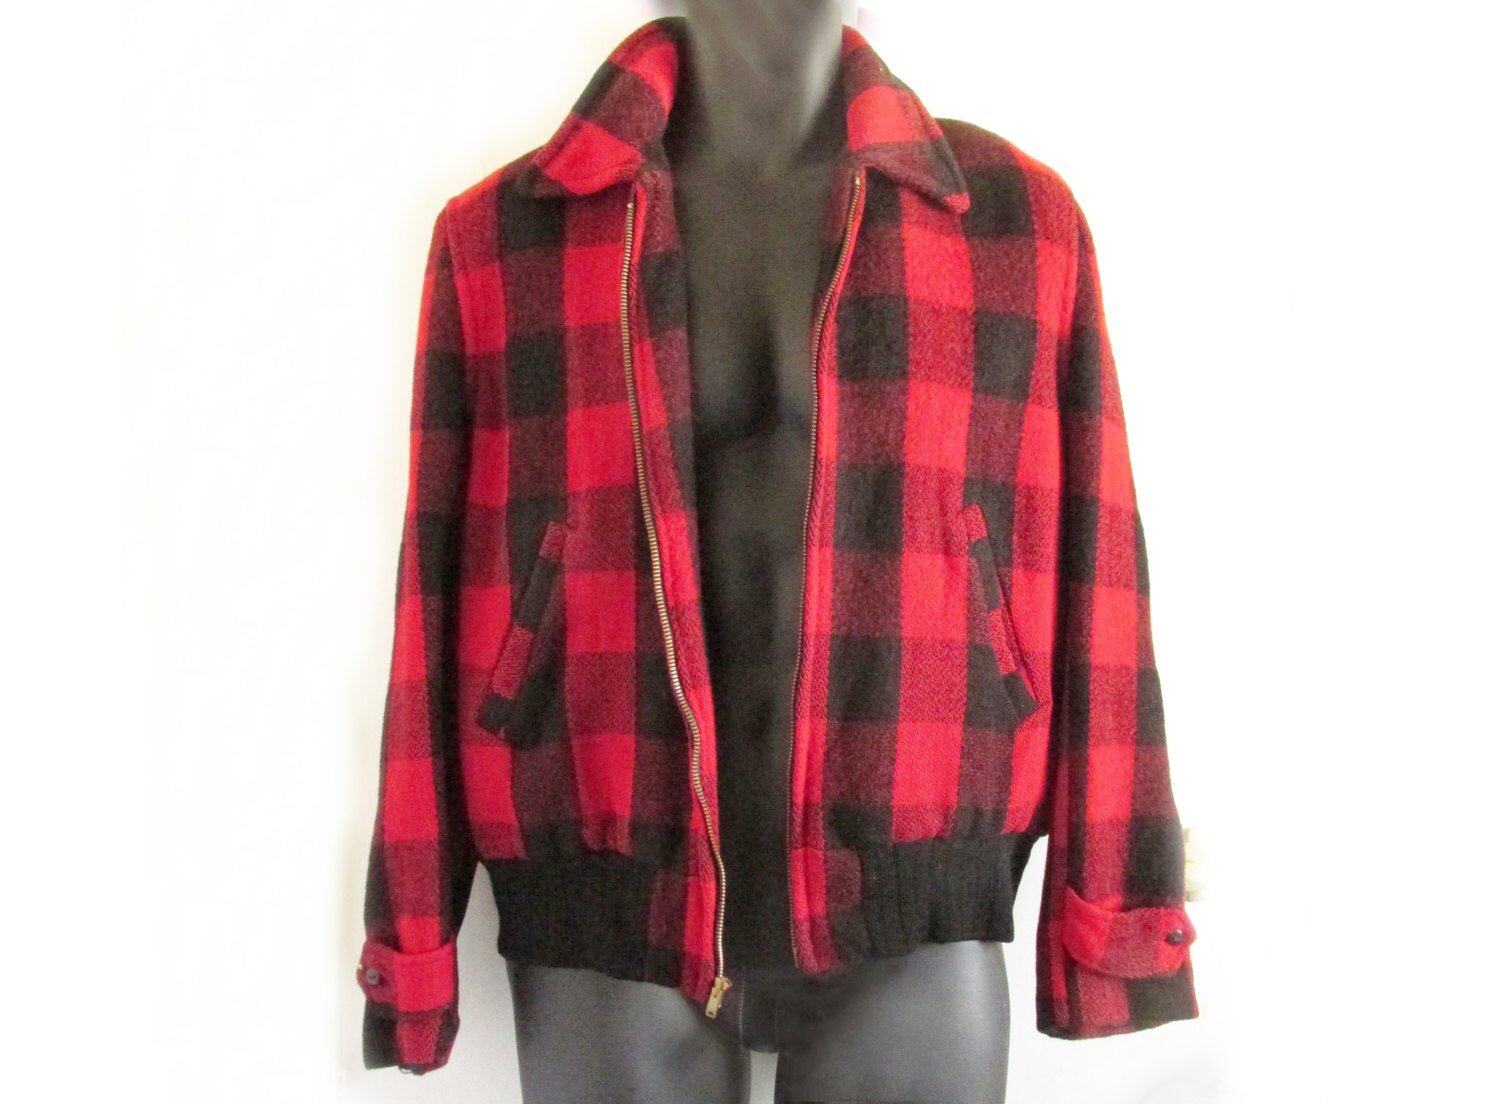 1940s-50s red plaid wool bomber jacket | Etsy